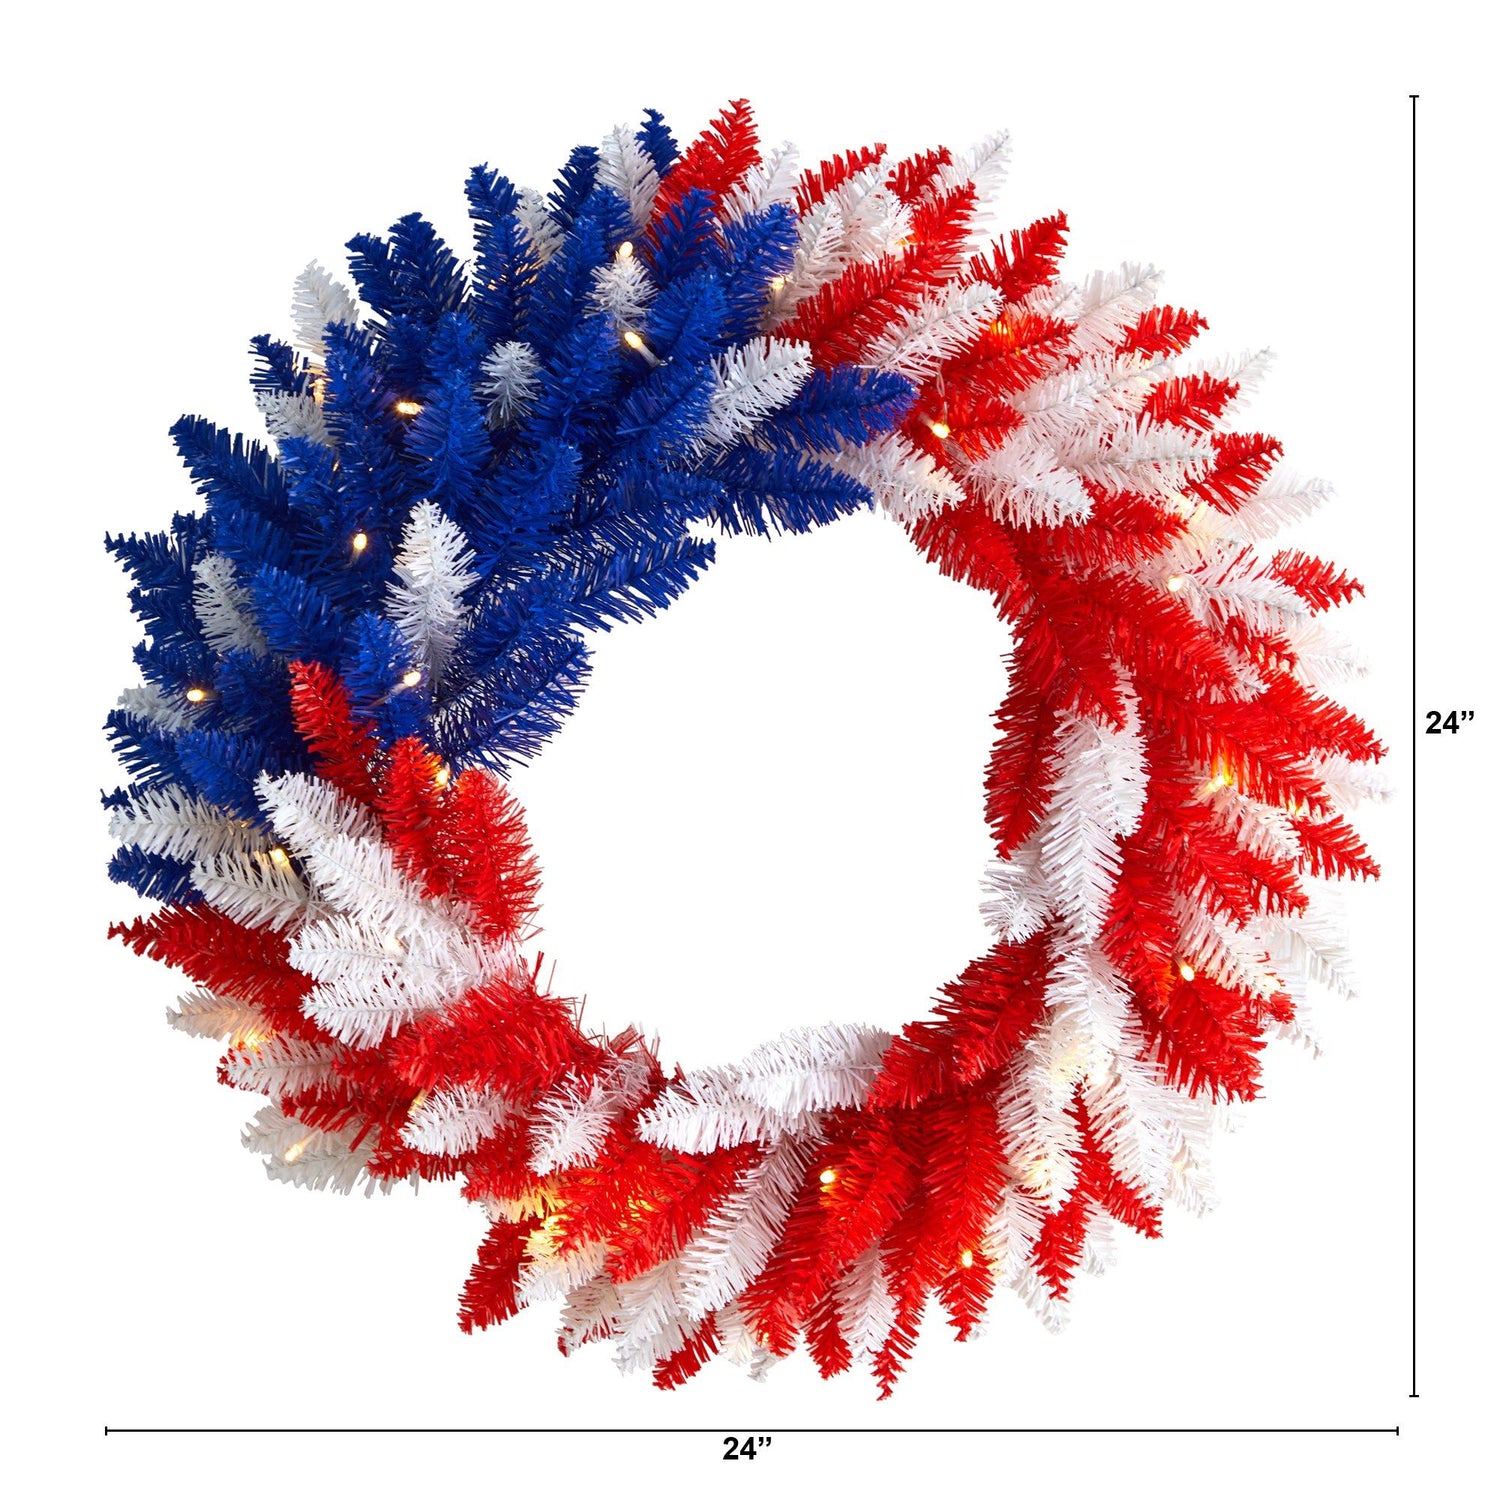 24” Patriotic Red, White and Blue “Americana” Wreath with 35 Warm LED Lights